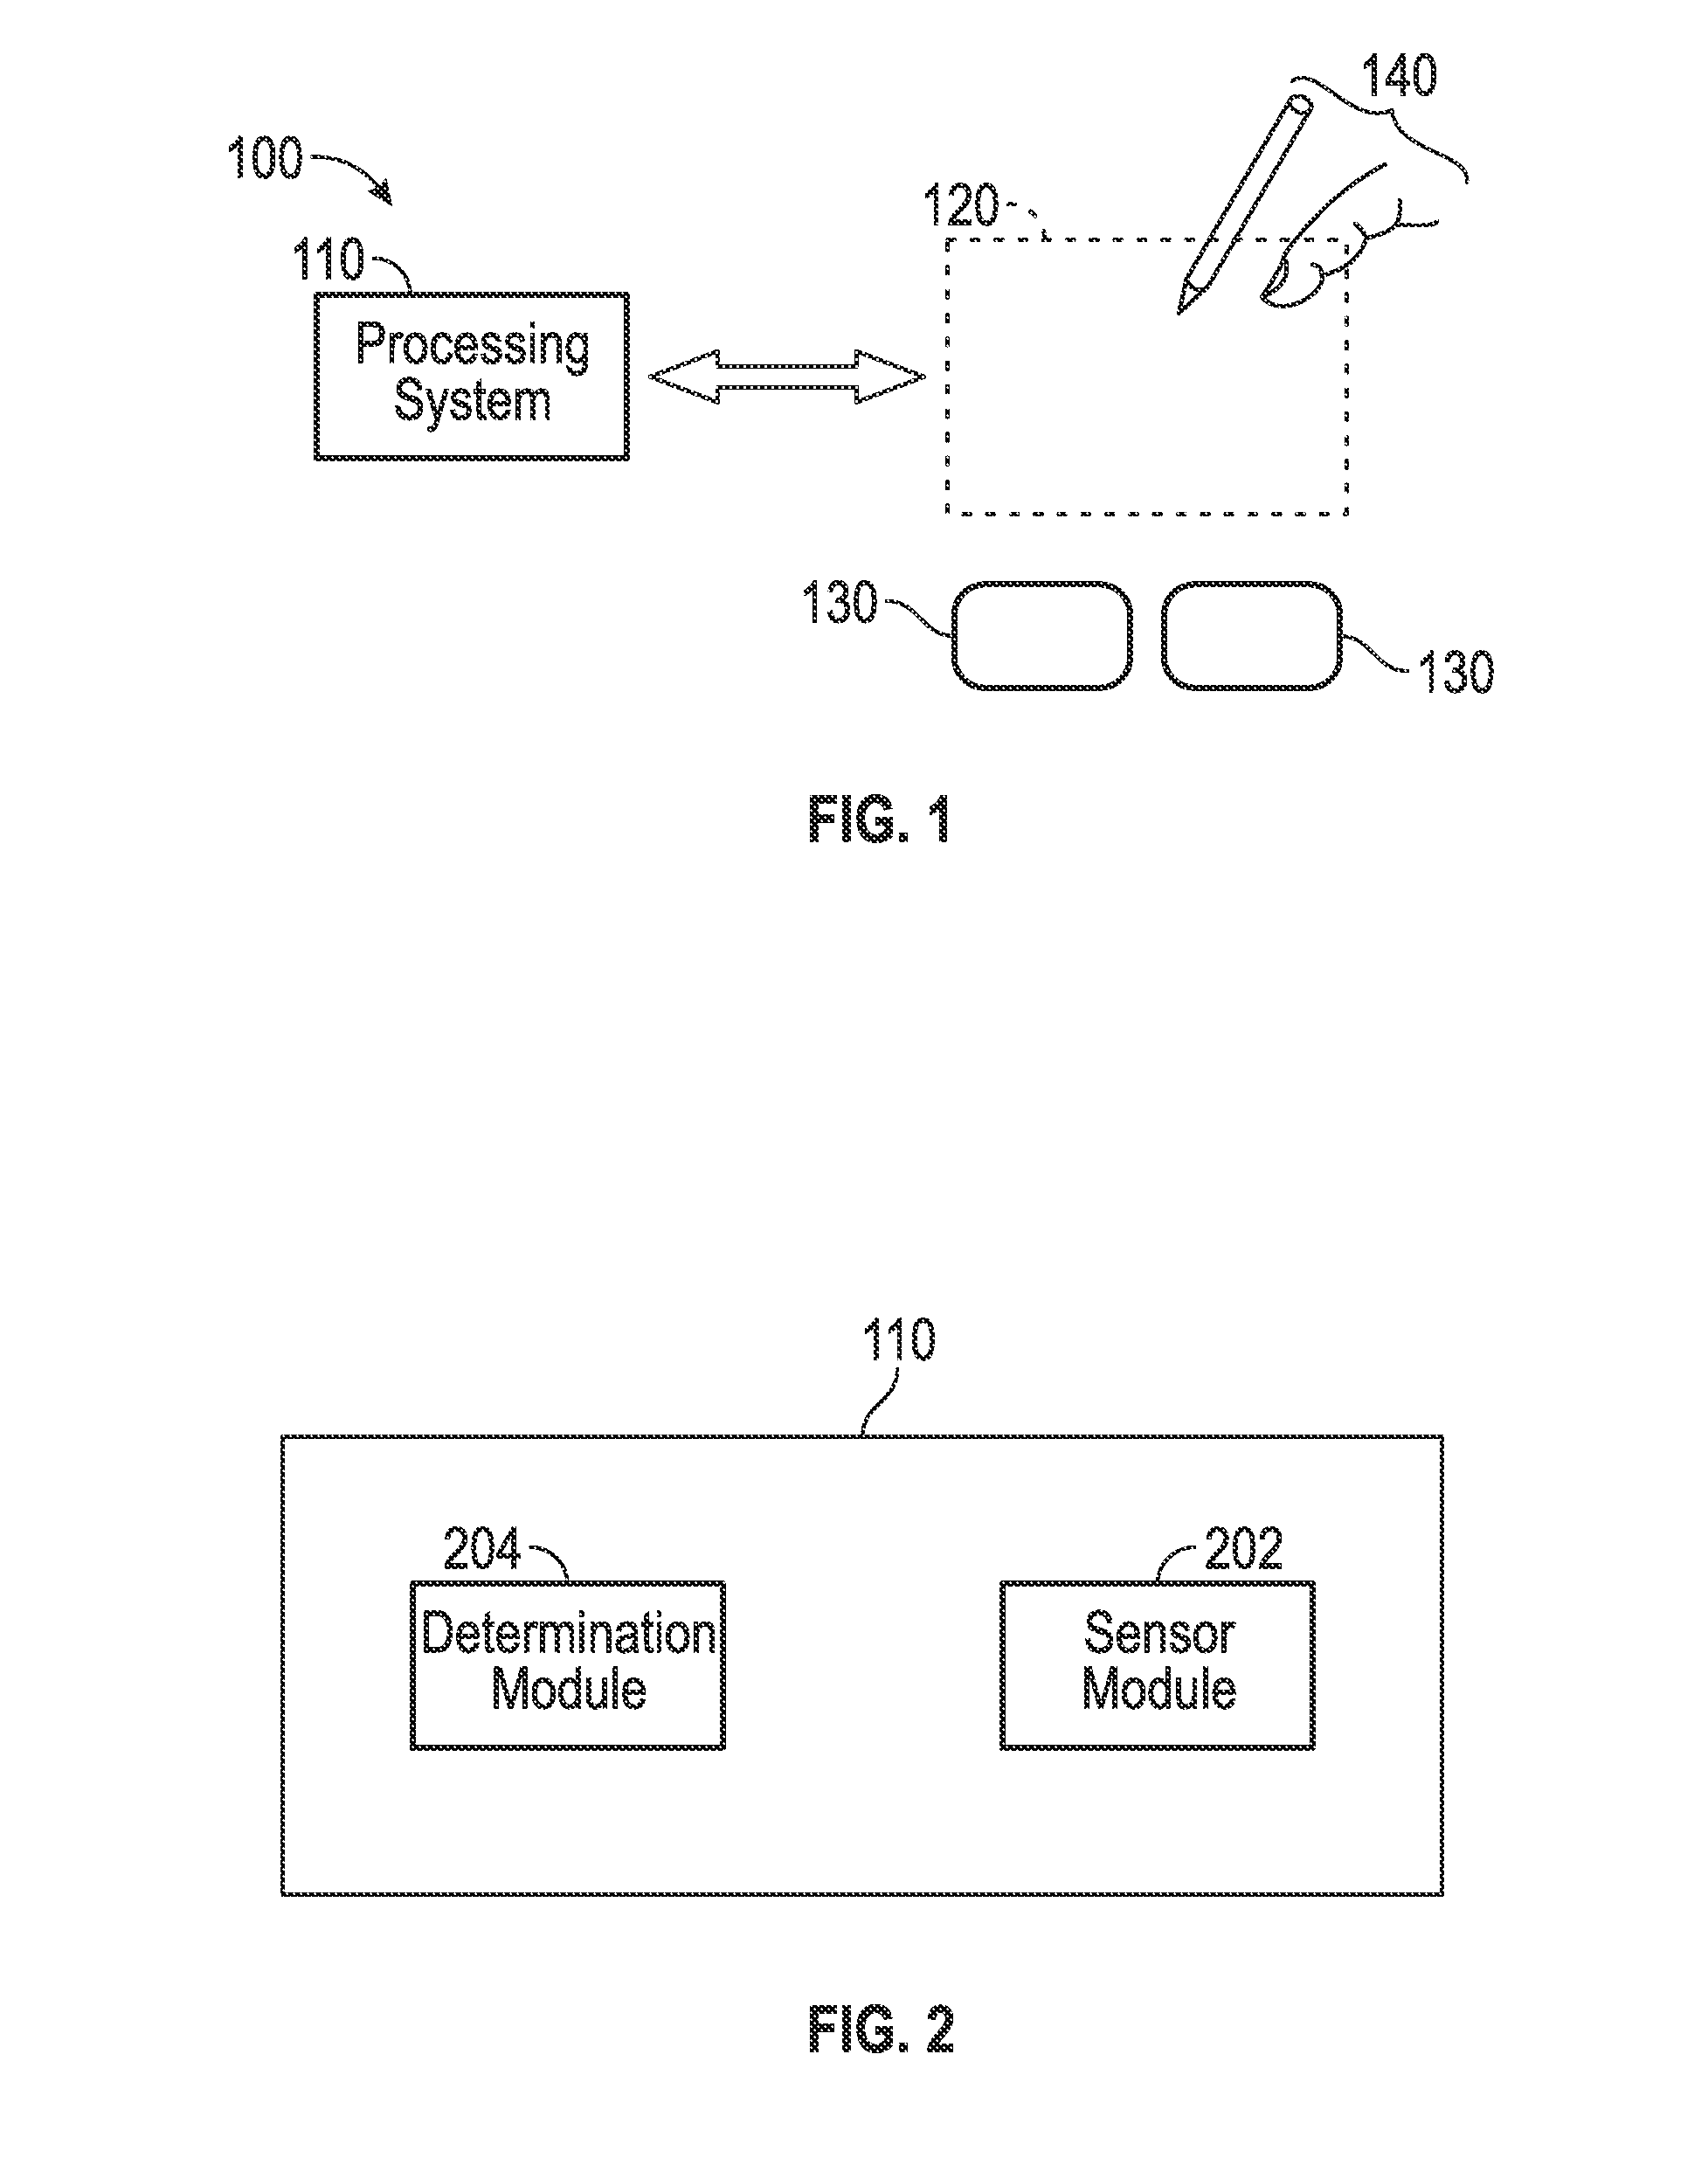 Methods and apparatus for click detection on a force pad using dynamic thresholds